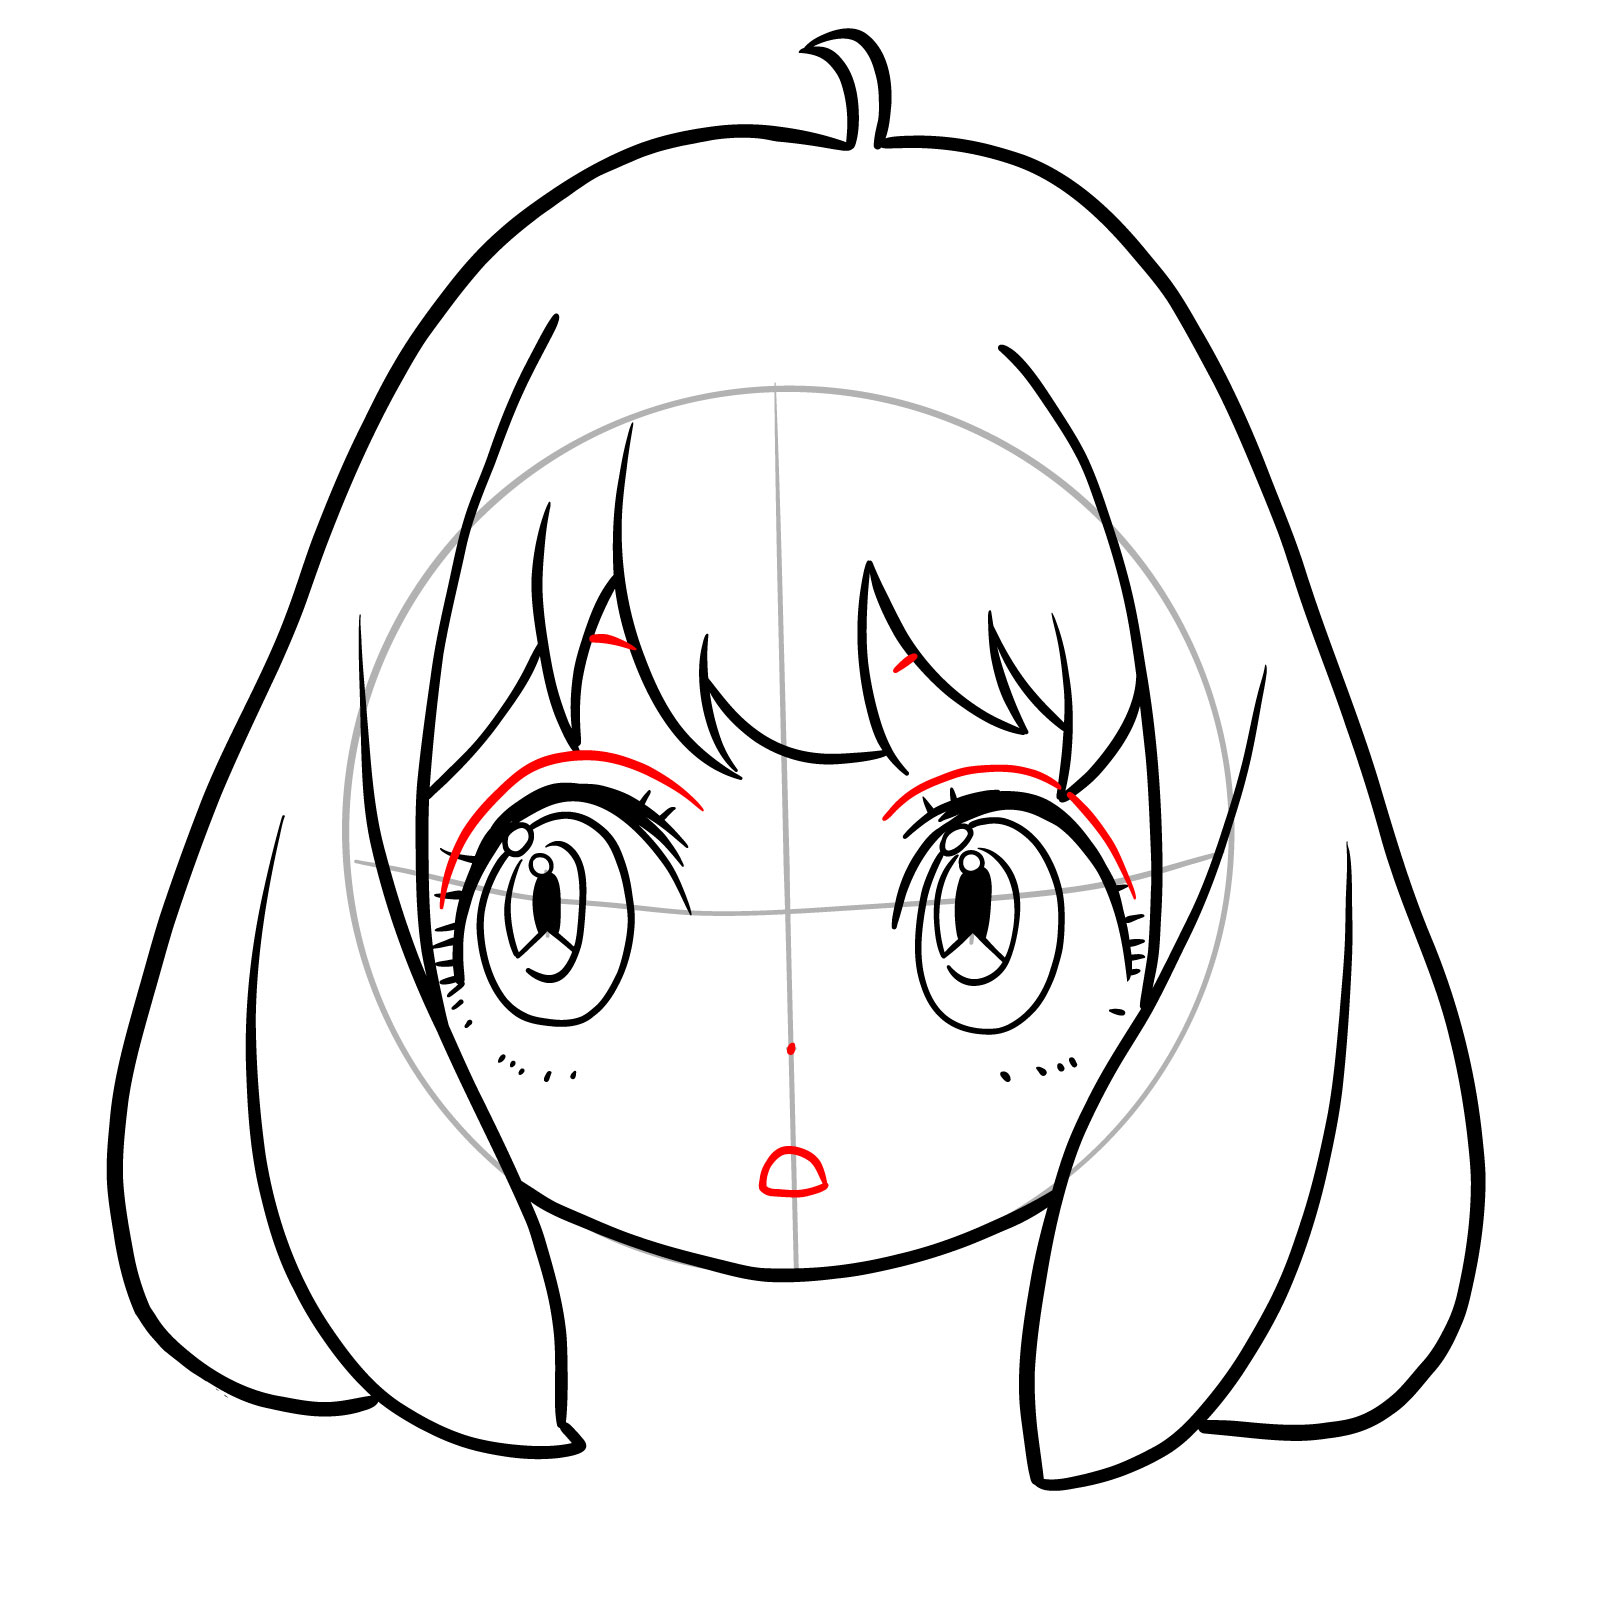 Step 10 in Anya's face drawing guide adding eyelids, brows, nose, and mouth